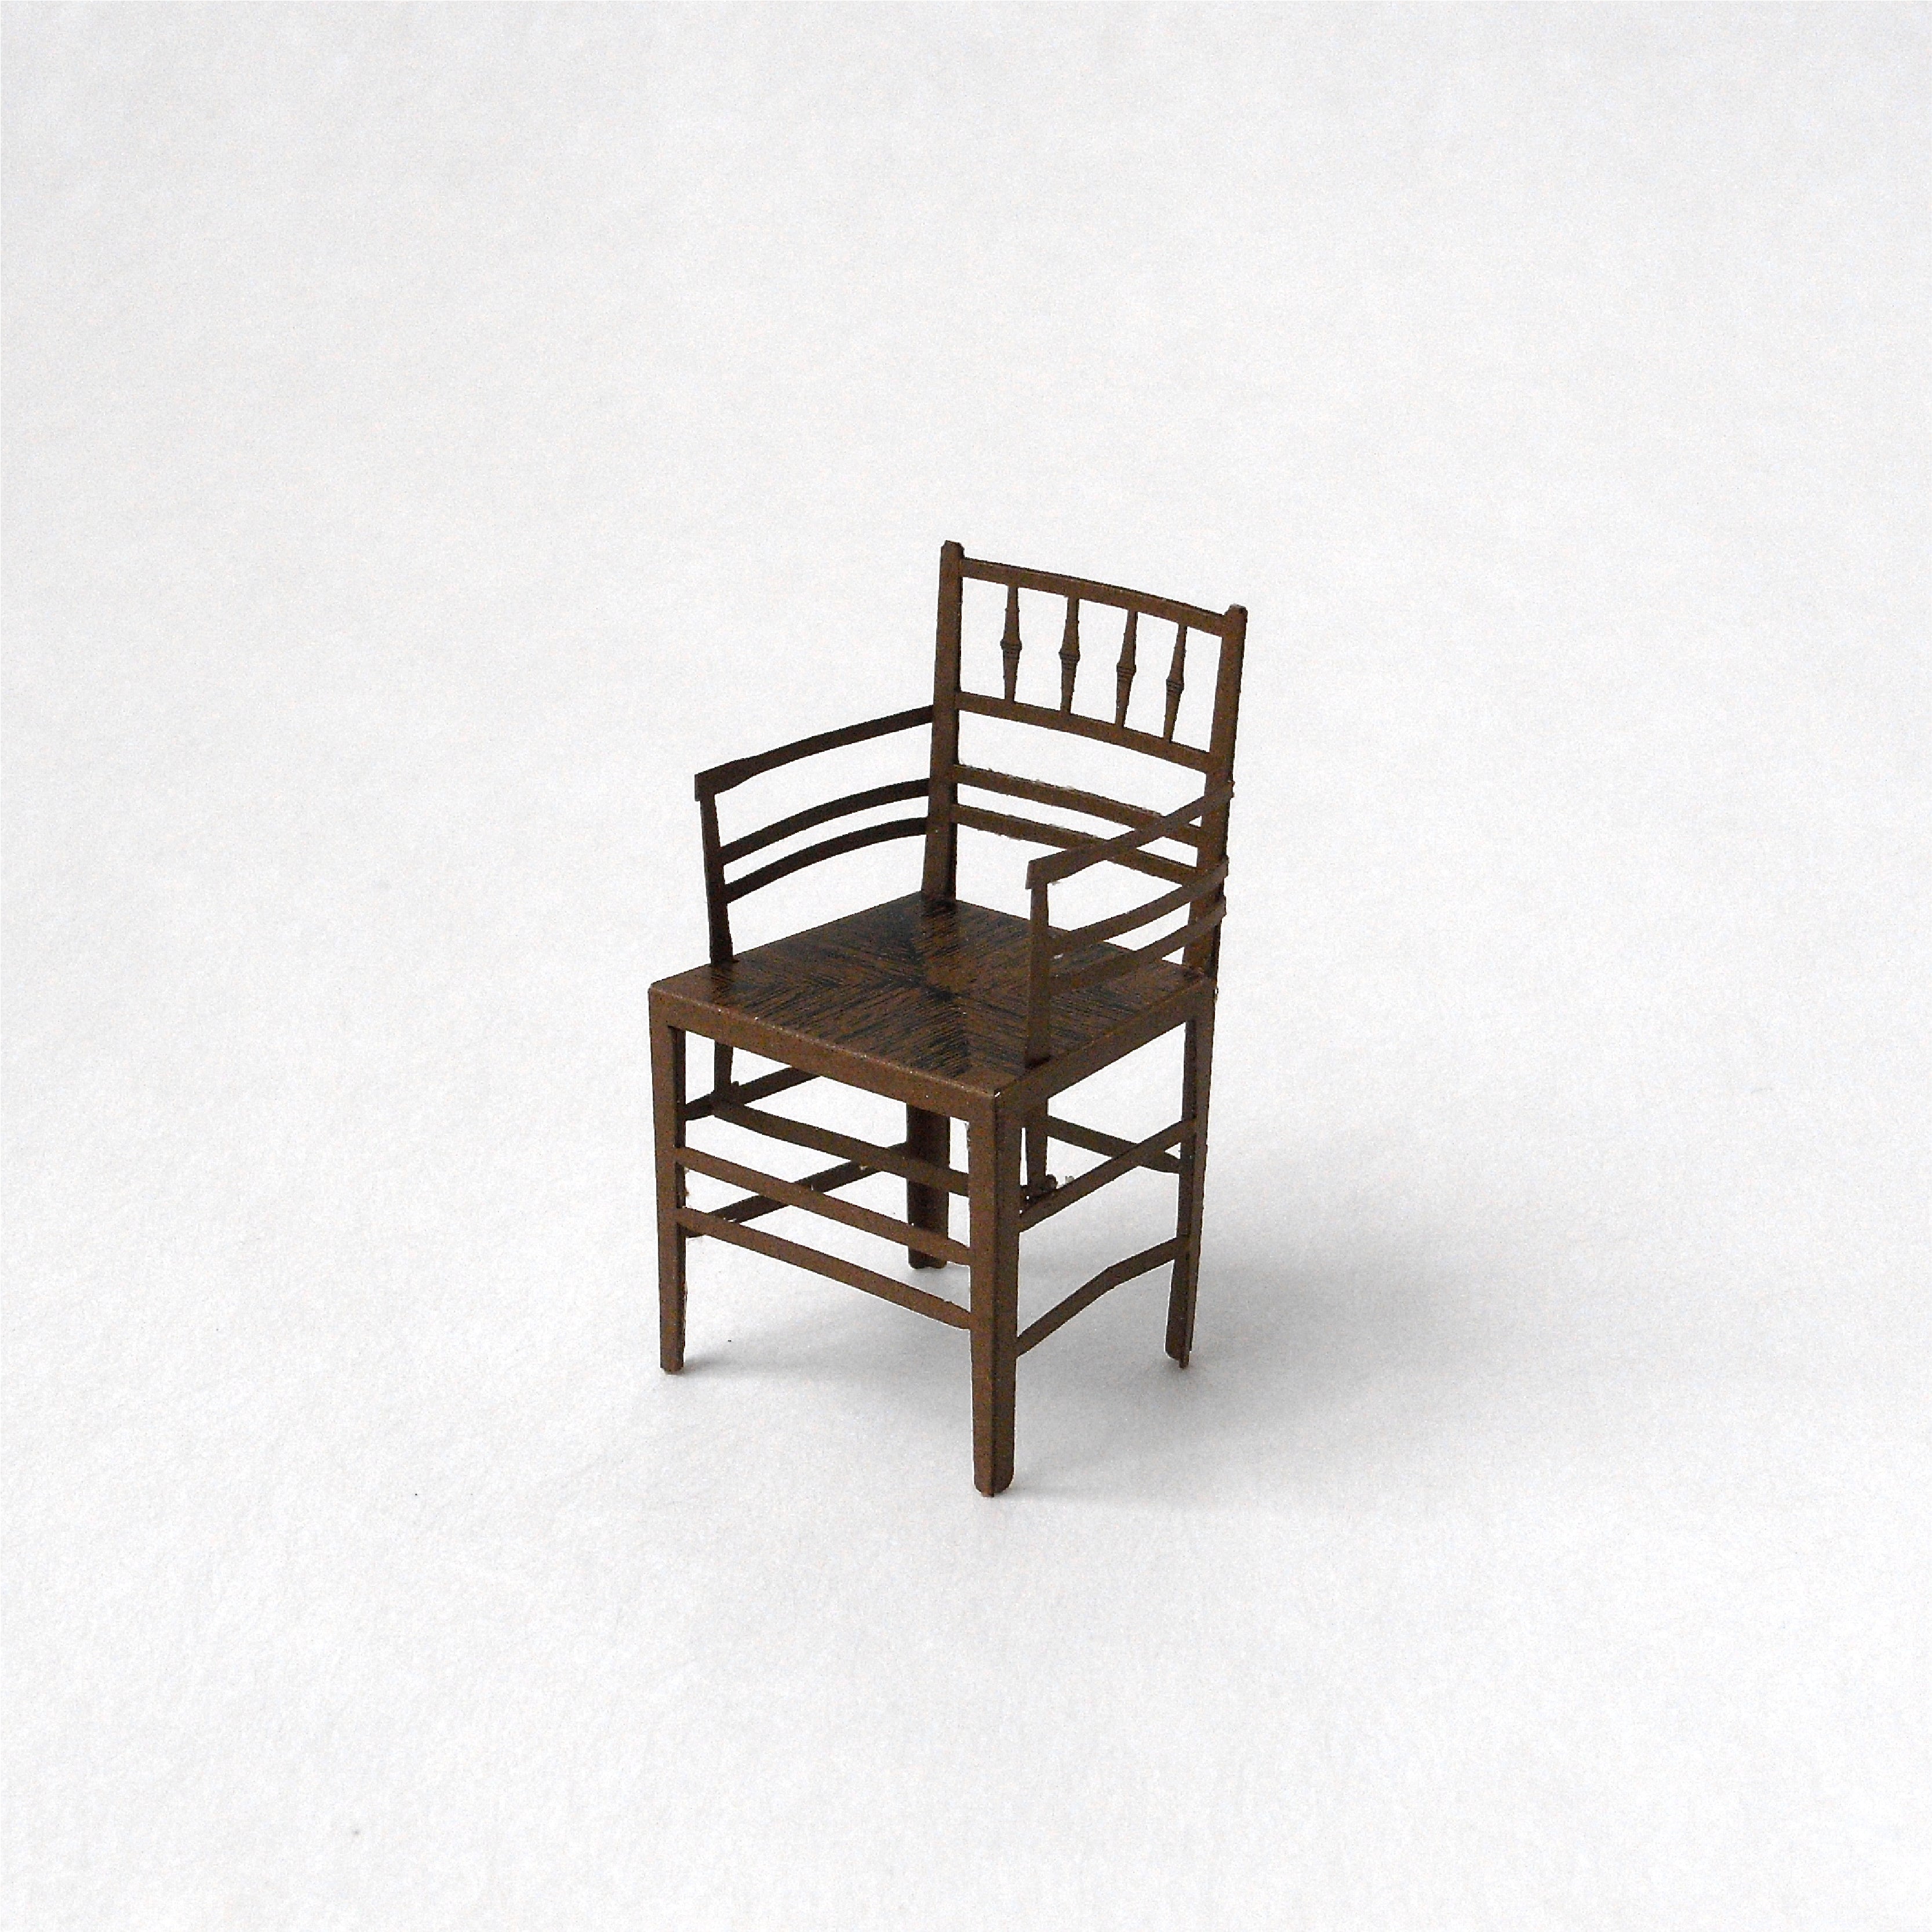 001 Sussex chair